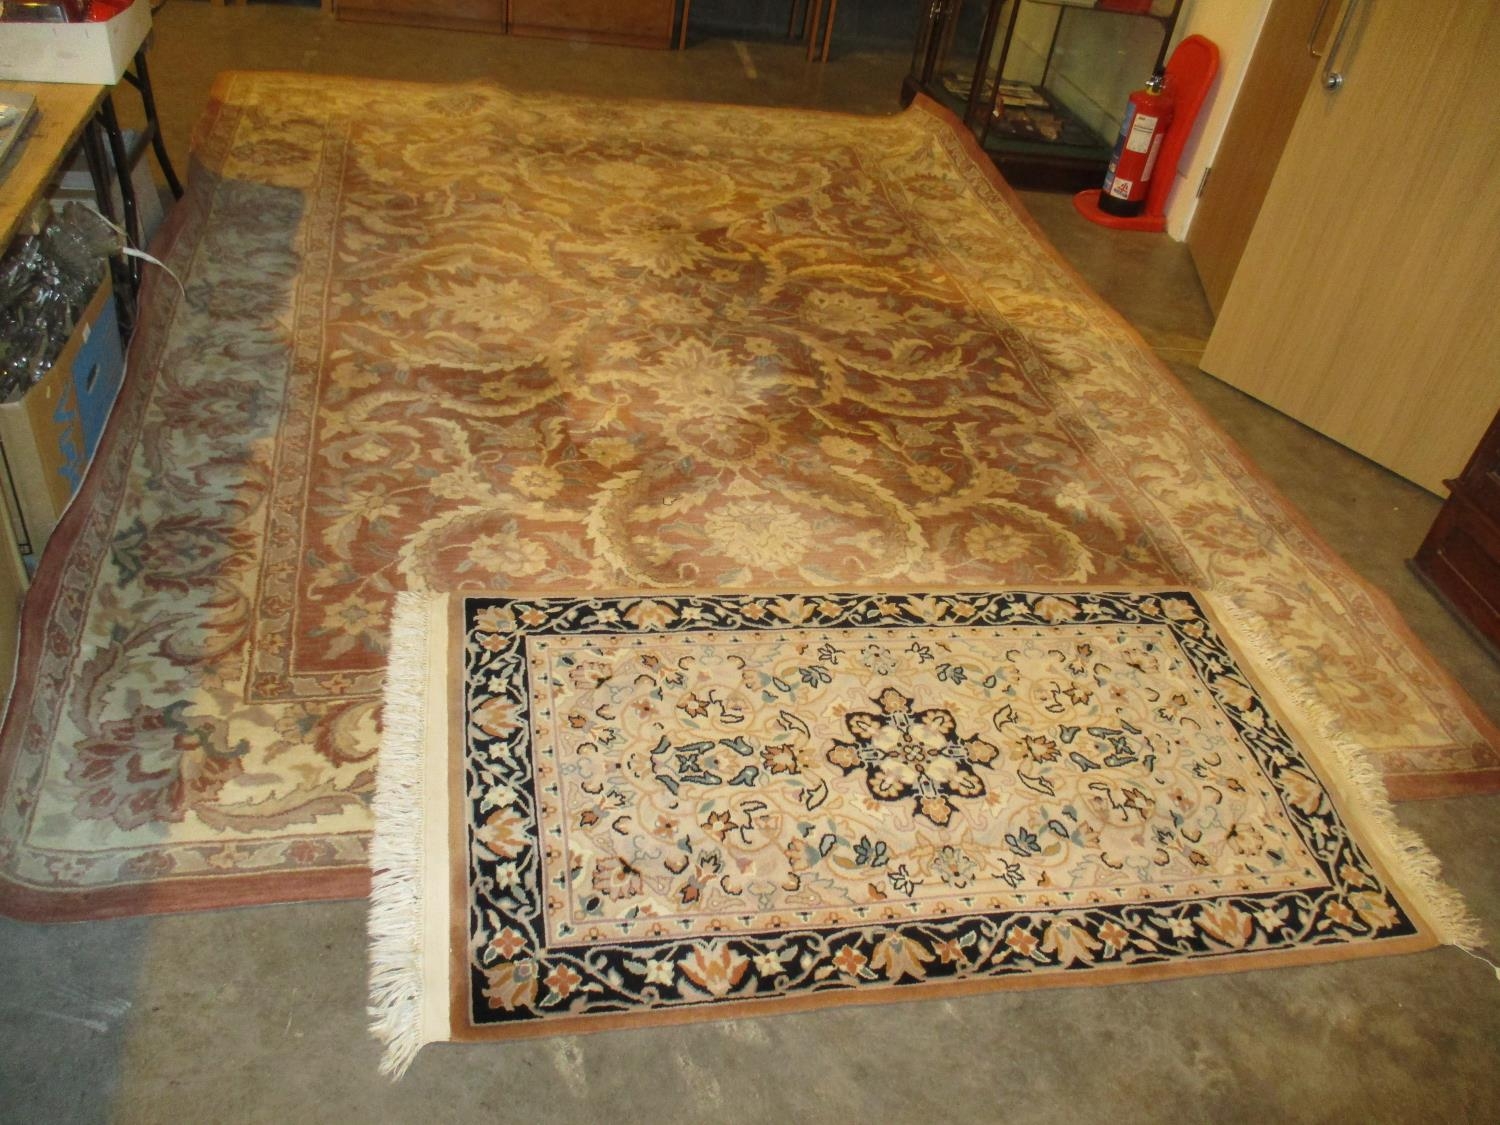 Traditional Deep Pile Border Pattern Carpet, 370x270cm, along with a Chinese Rug